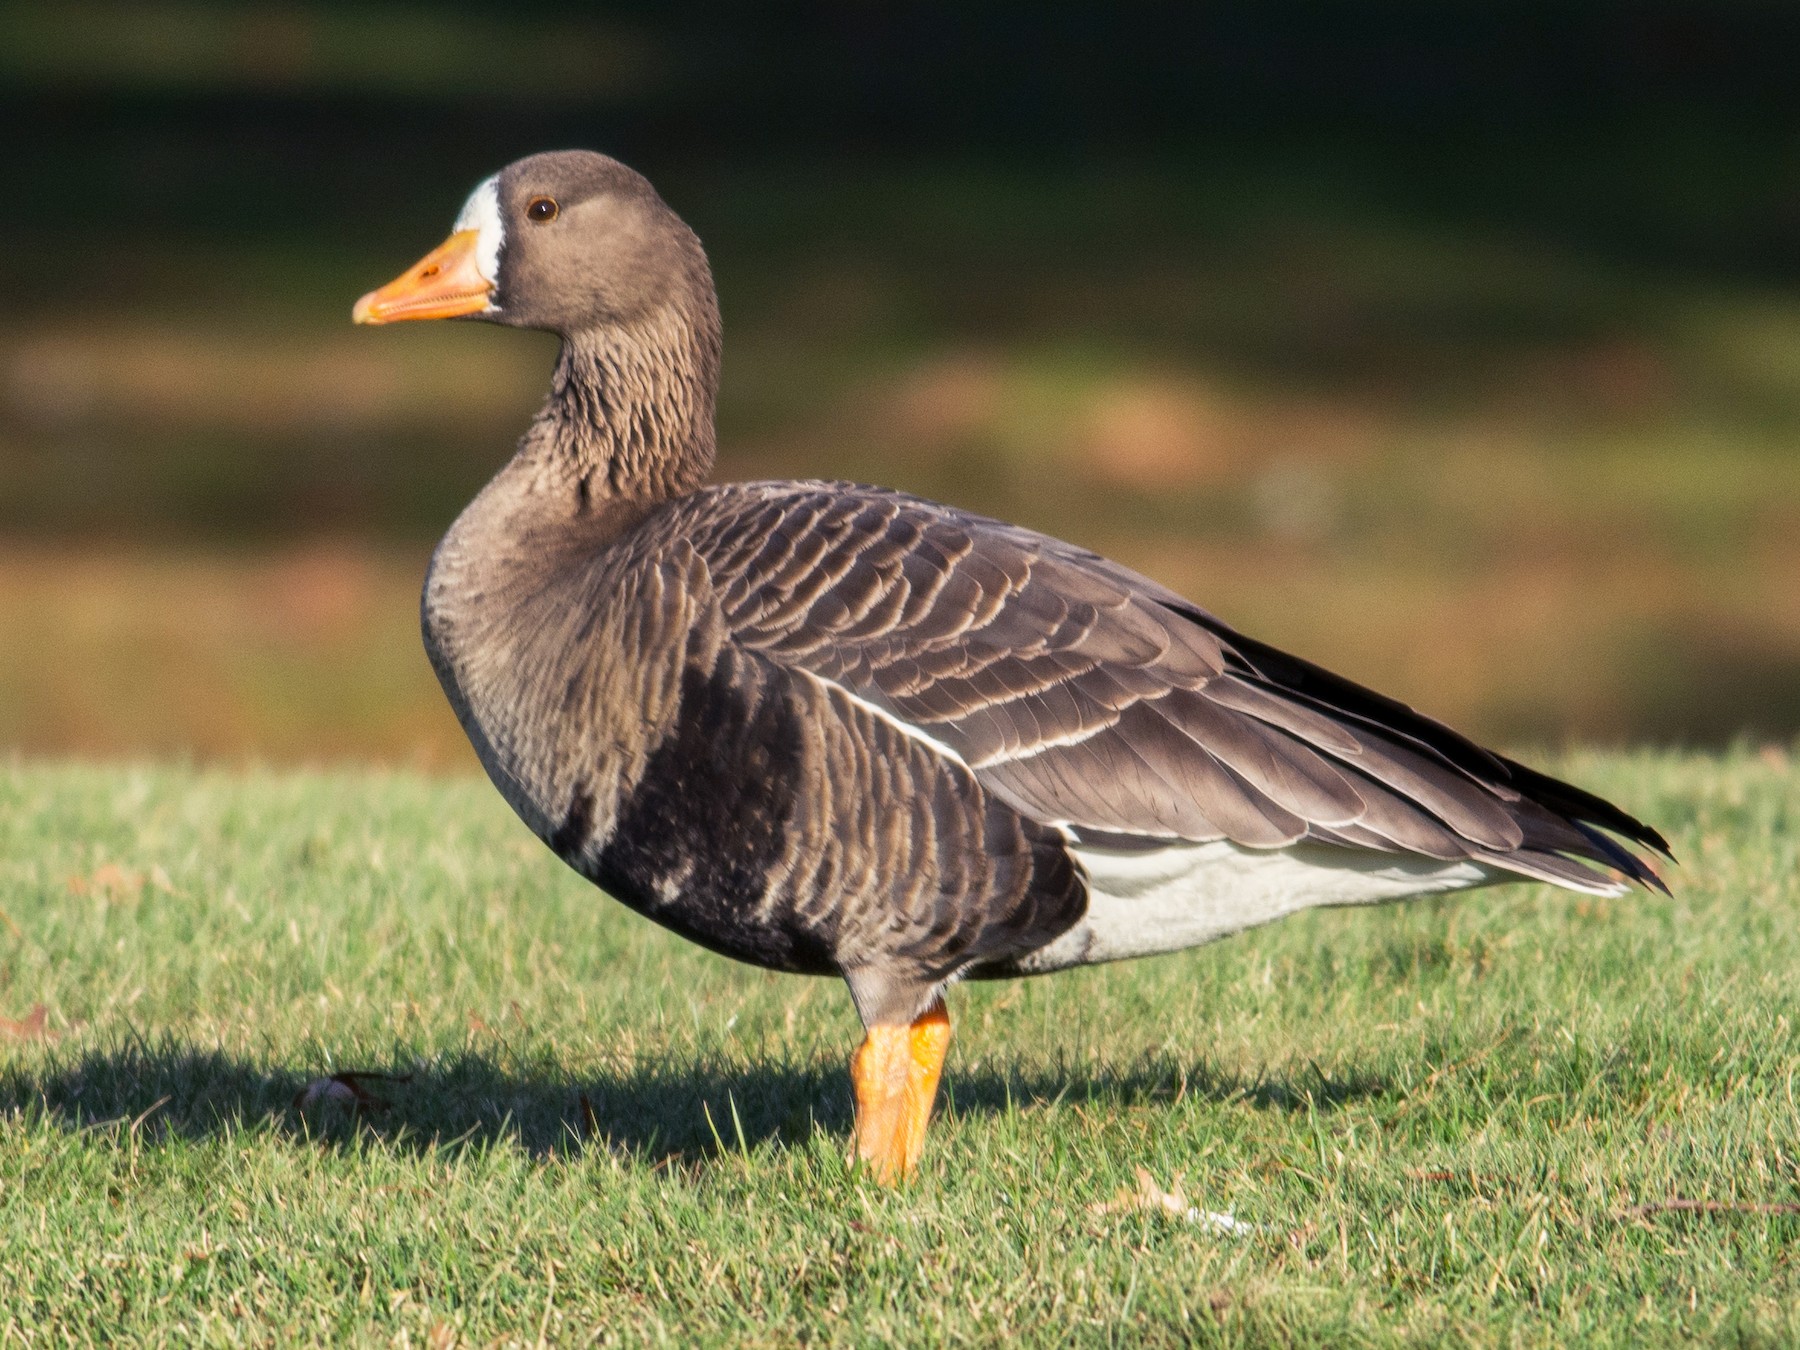 Greater White-fronted Goose - Derek Rogers